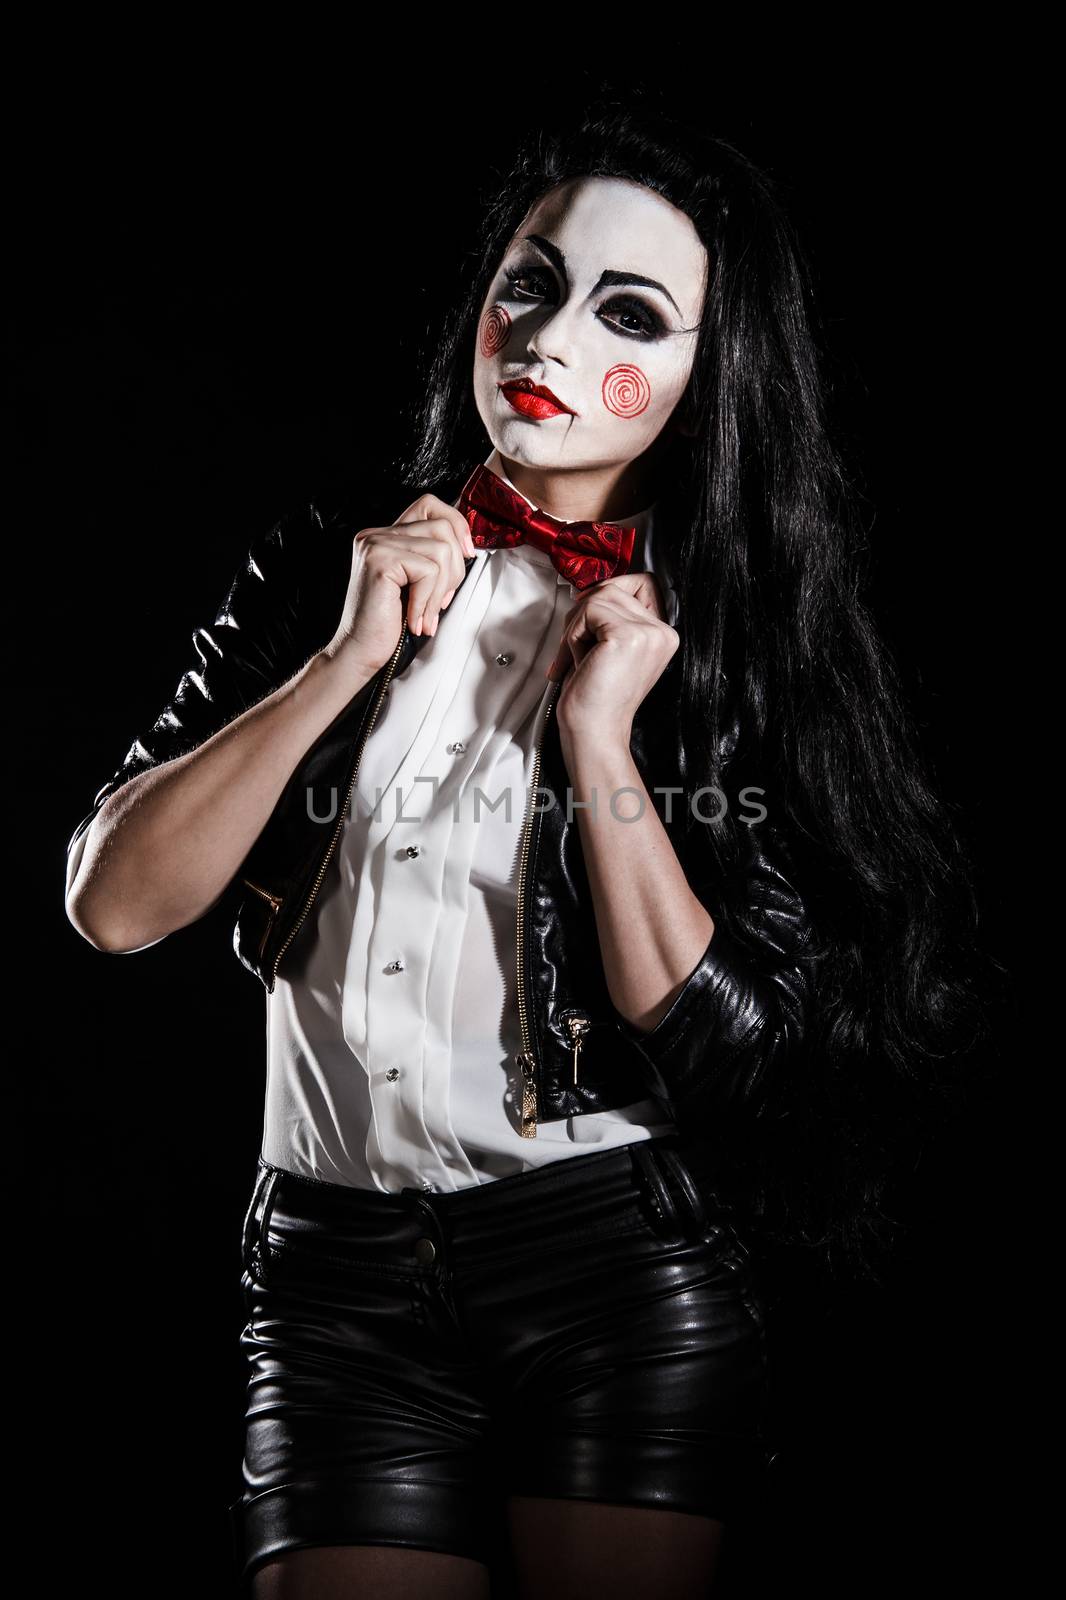 Woman with a Saw film cosplay makeup over black background